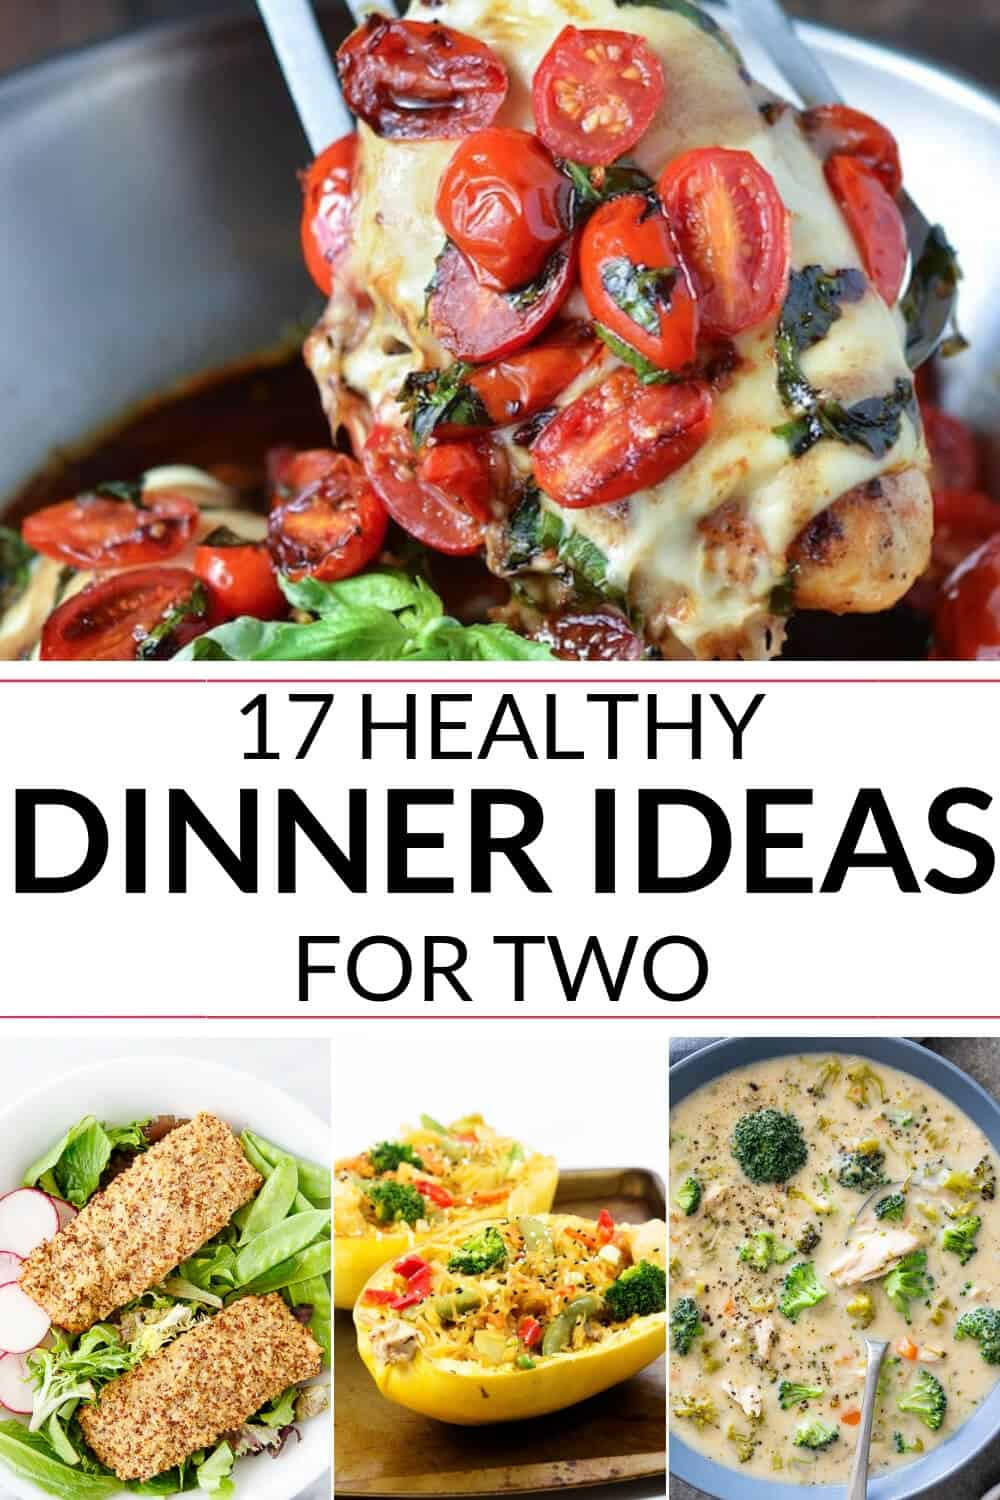 Dinner Ideas For Two
 Healthy Dinner Ideas for Two